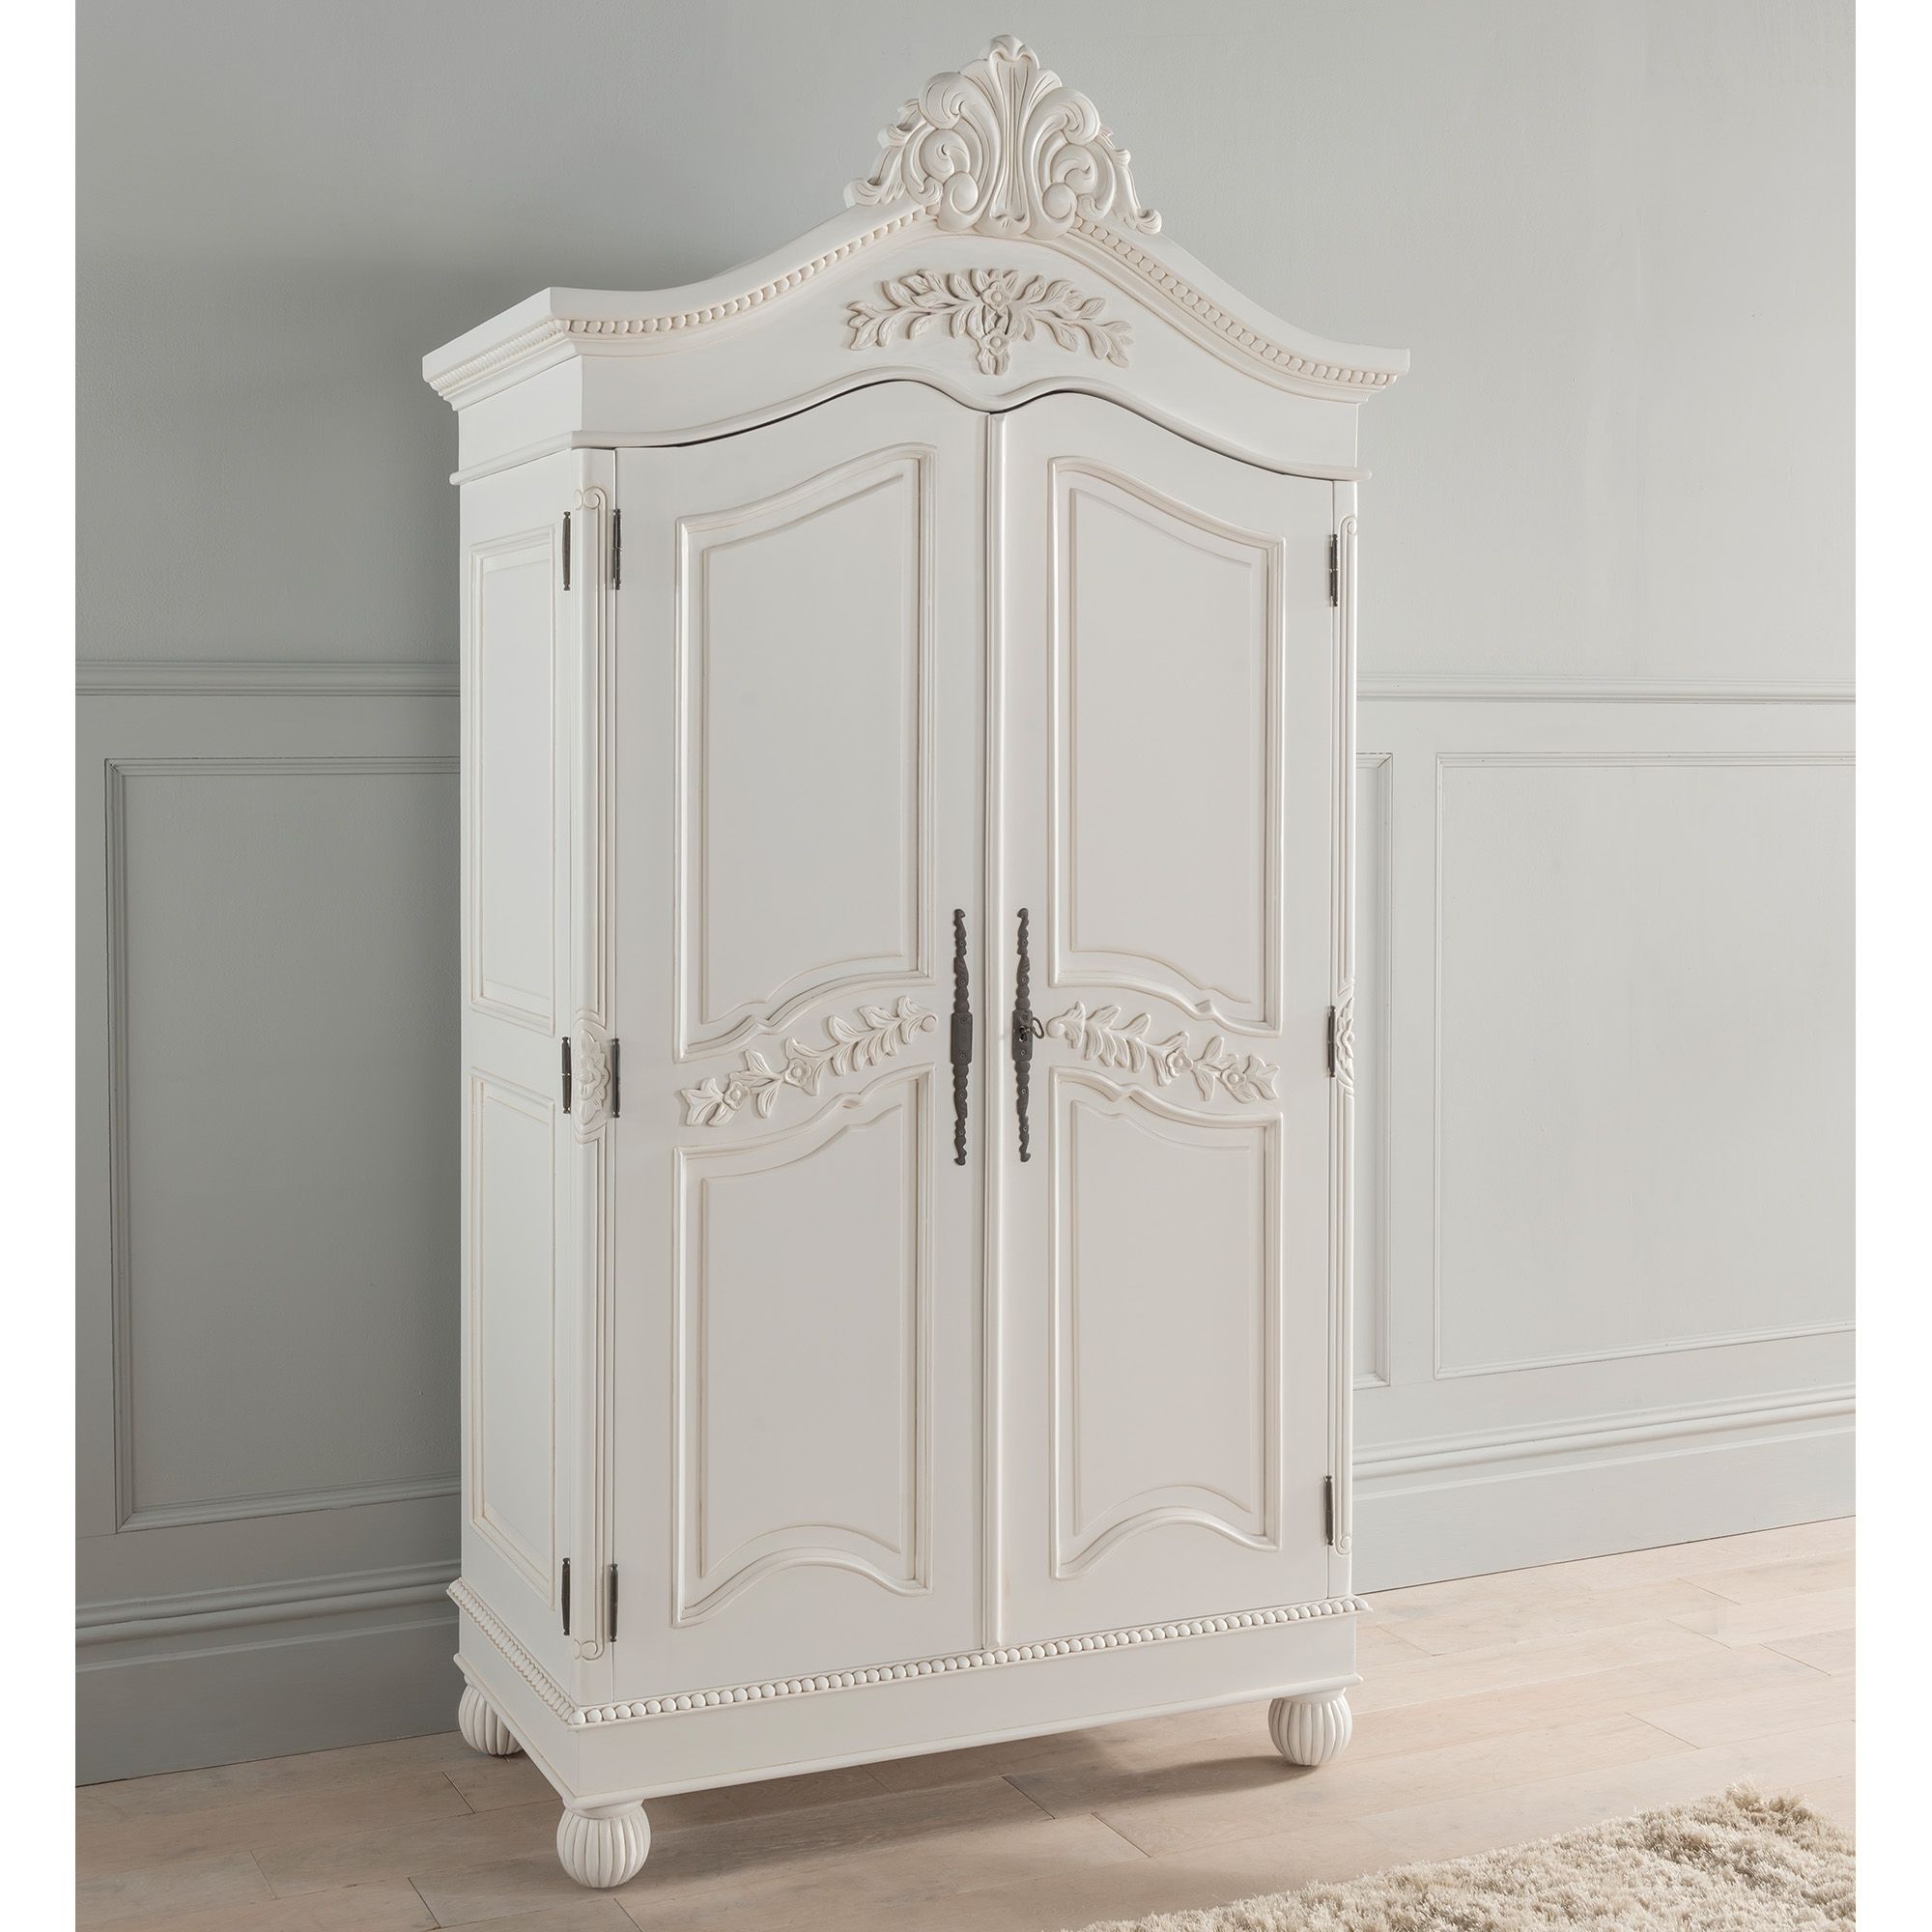 Antique French Style Wardrobe | Shabby Chic Bedroom Furniture In Shabby Chic Wardrobes (View 6 of 20)